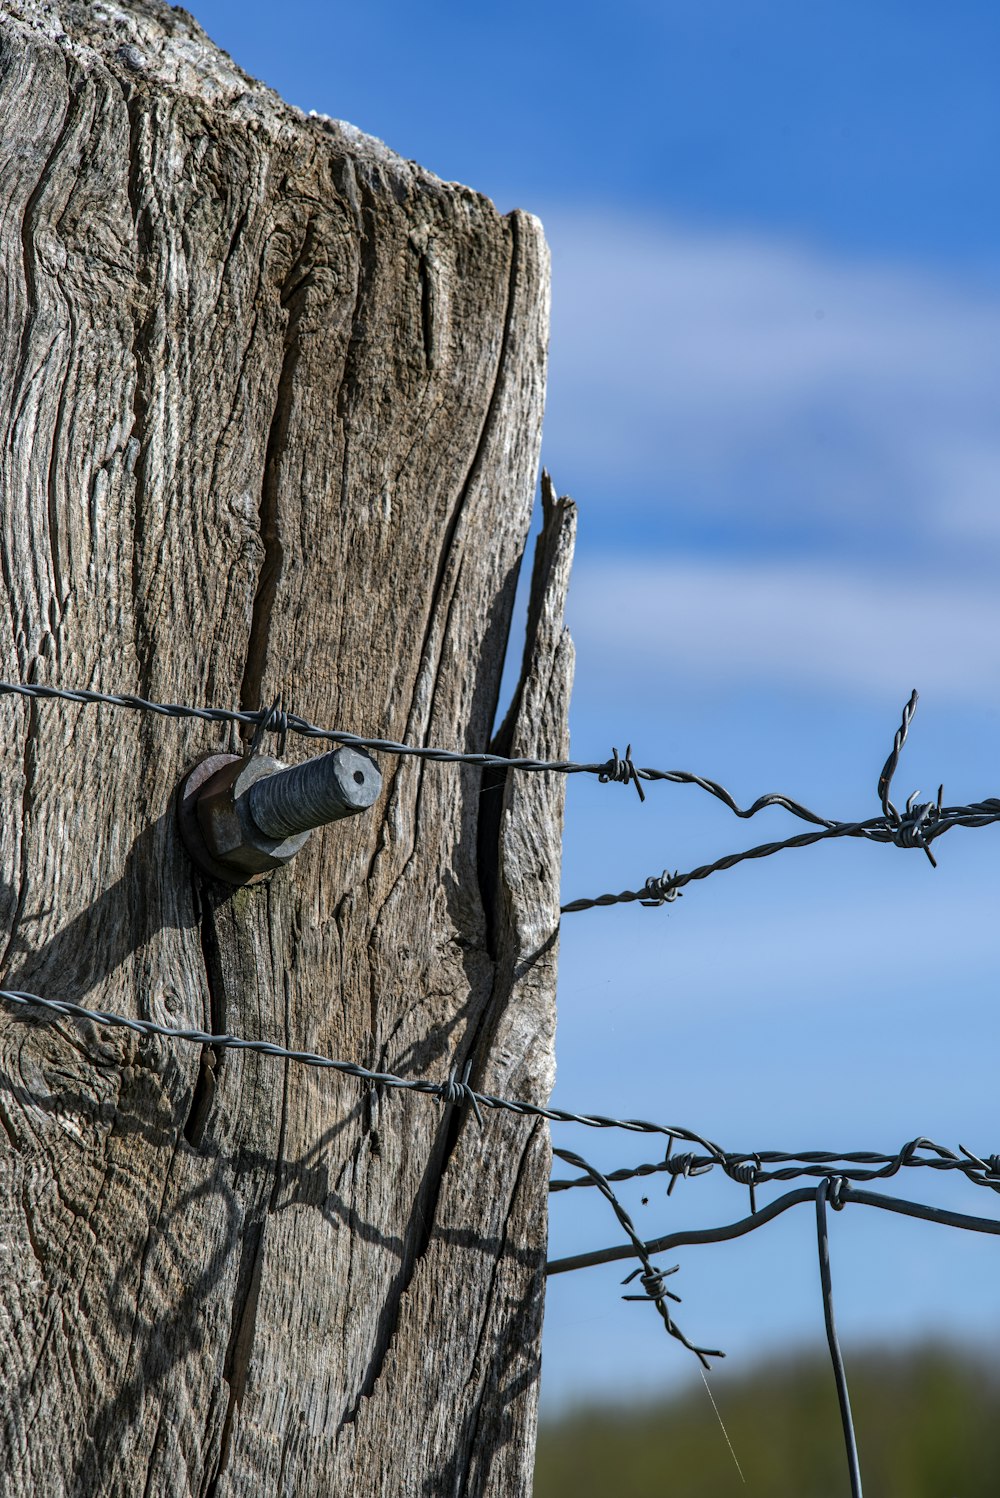 a close up of a wooden post with barbed wire